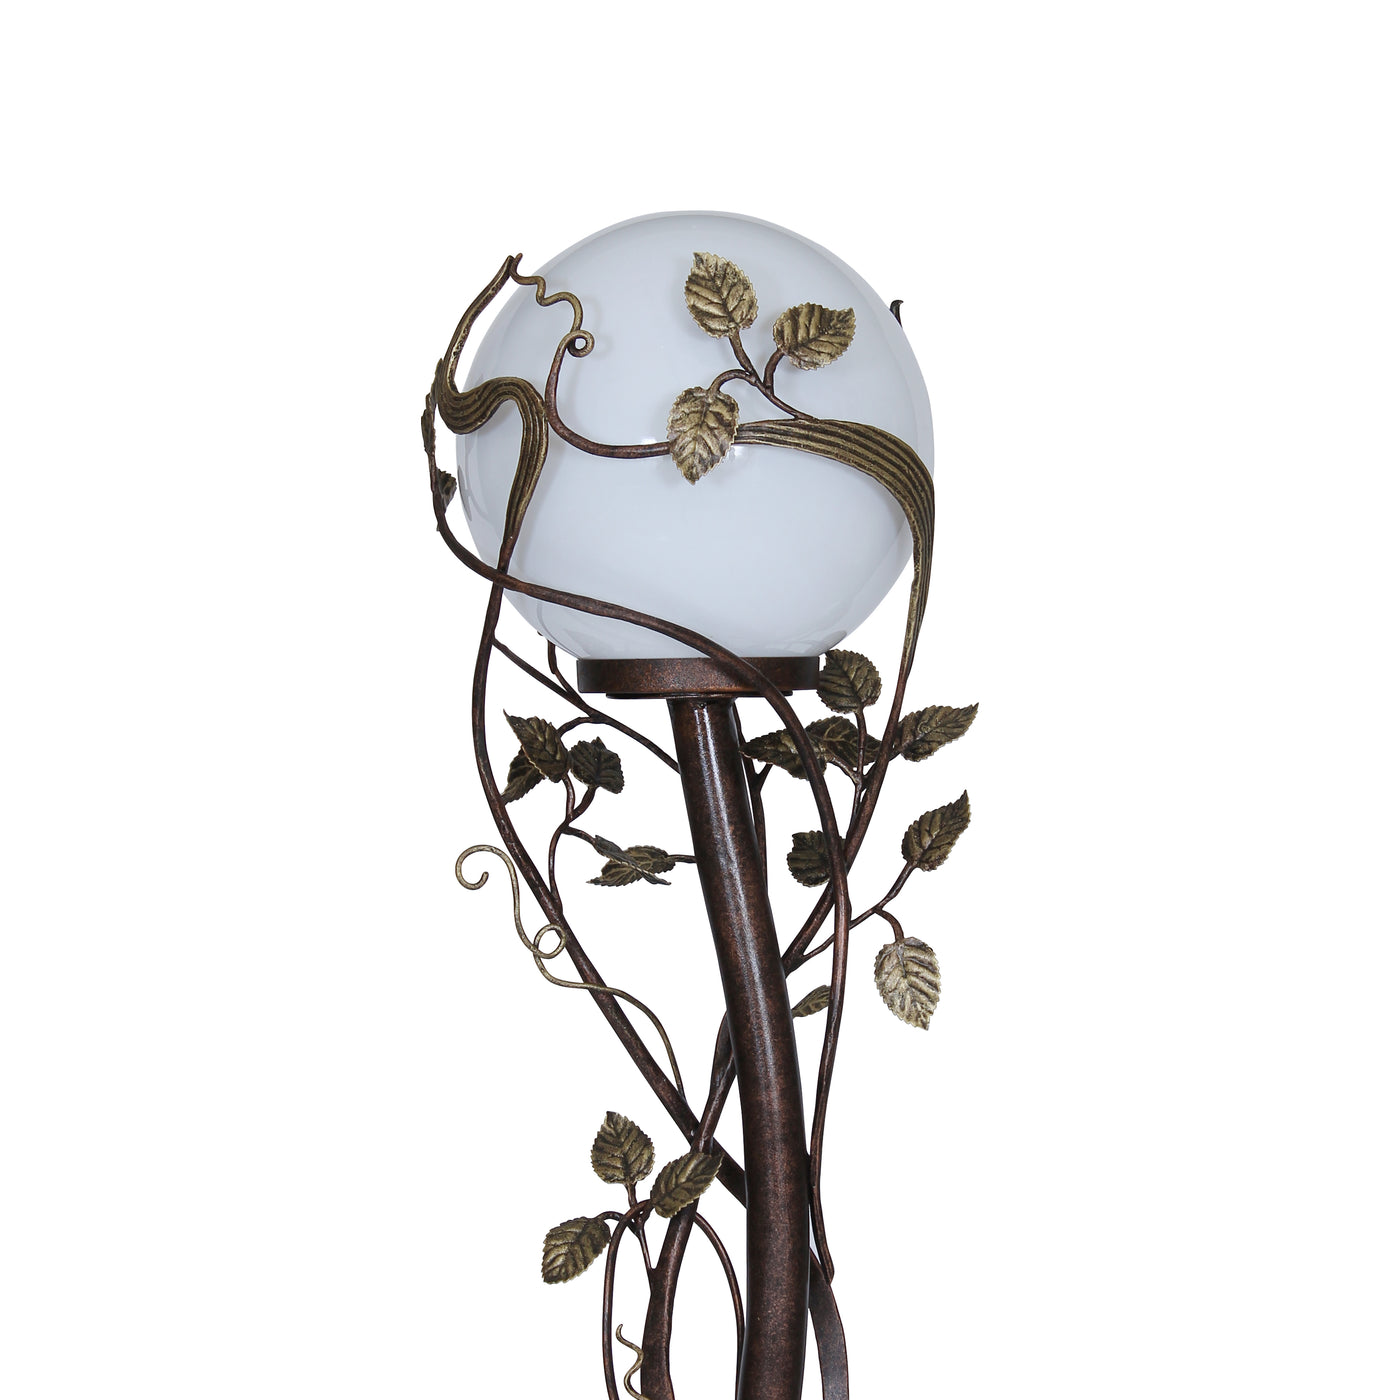 Top part of luxurious metal forged decorative floor lamp made up of stems and leaves, painted in an antique bronze finish